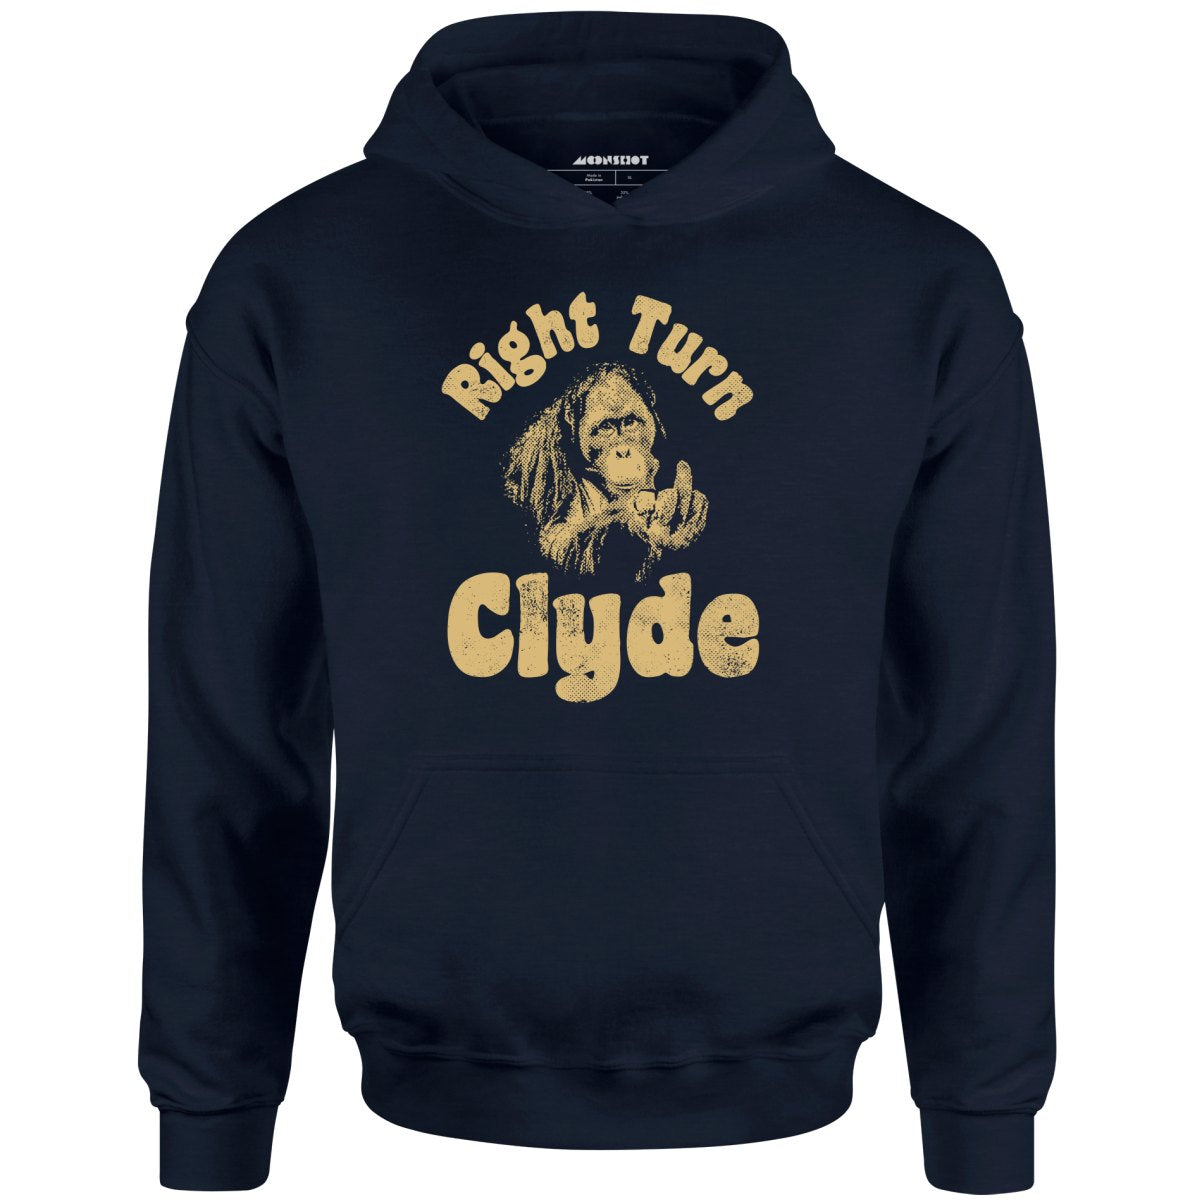 Right Turn Clyde - Unisex Hoodie